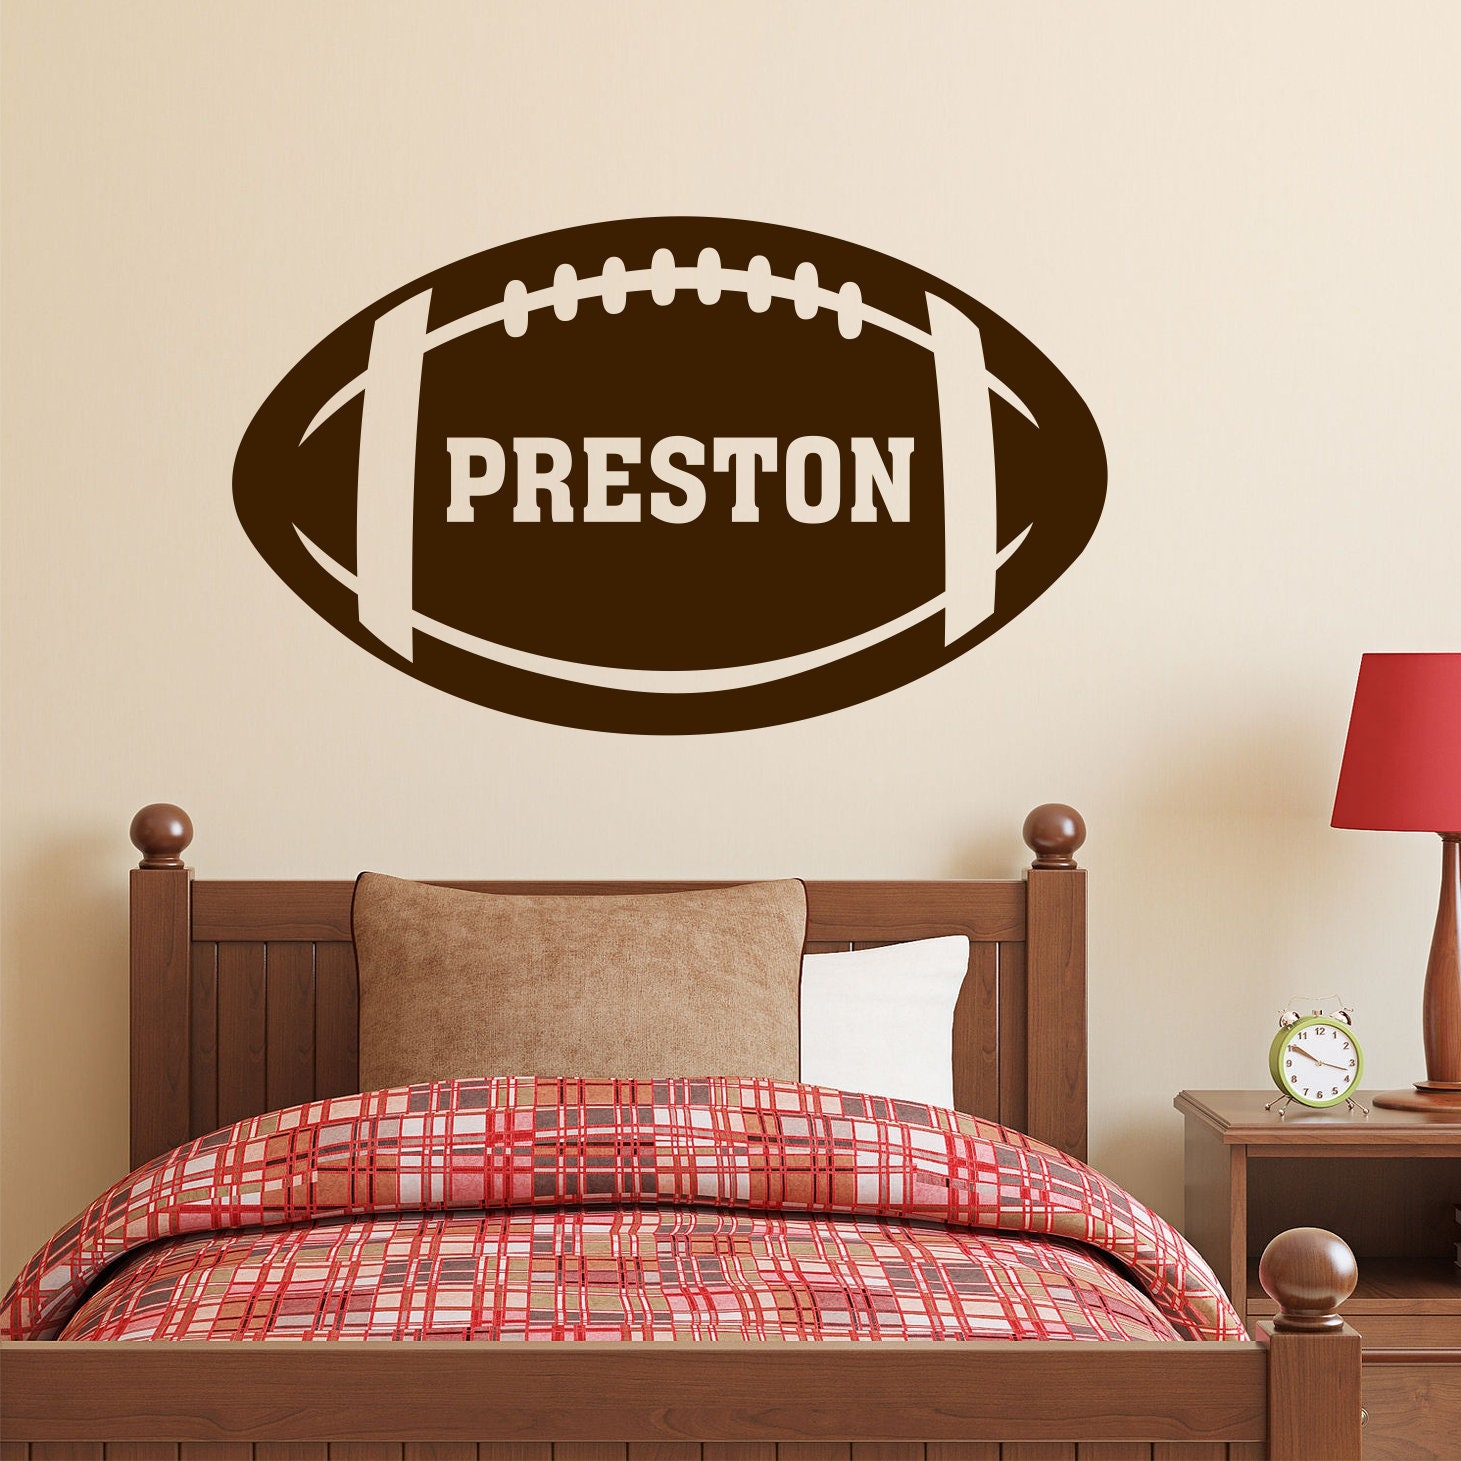 Sports Bedroom Game On Playroom, Vinyl Wall Art Sticker Mural Decal 